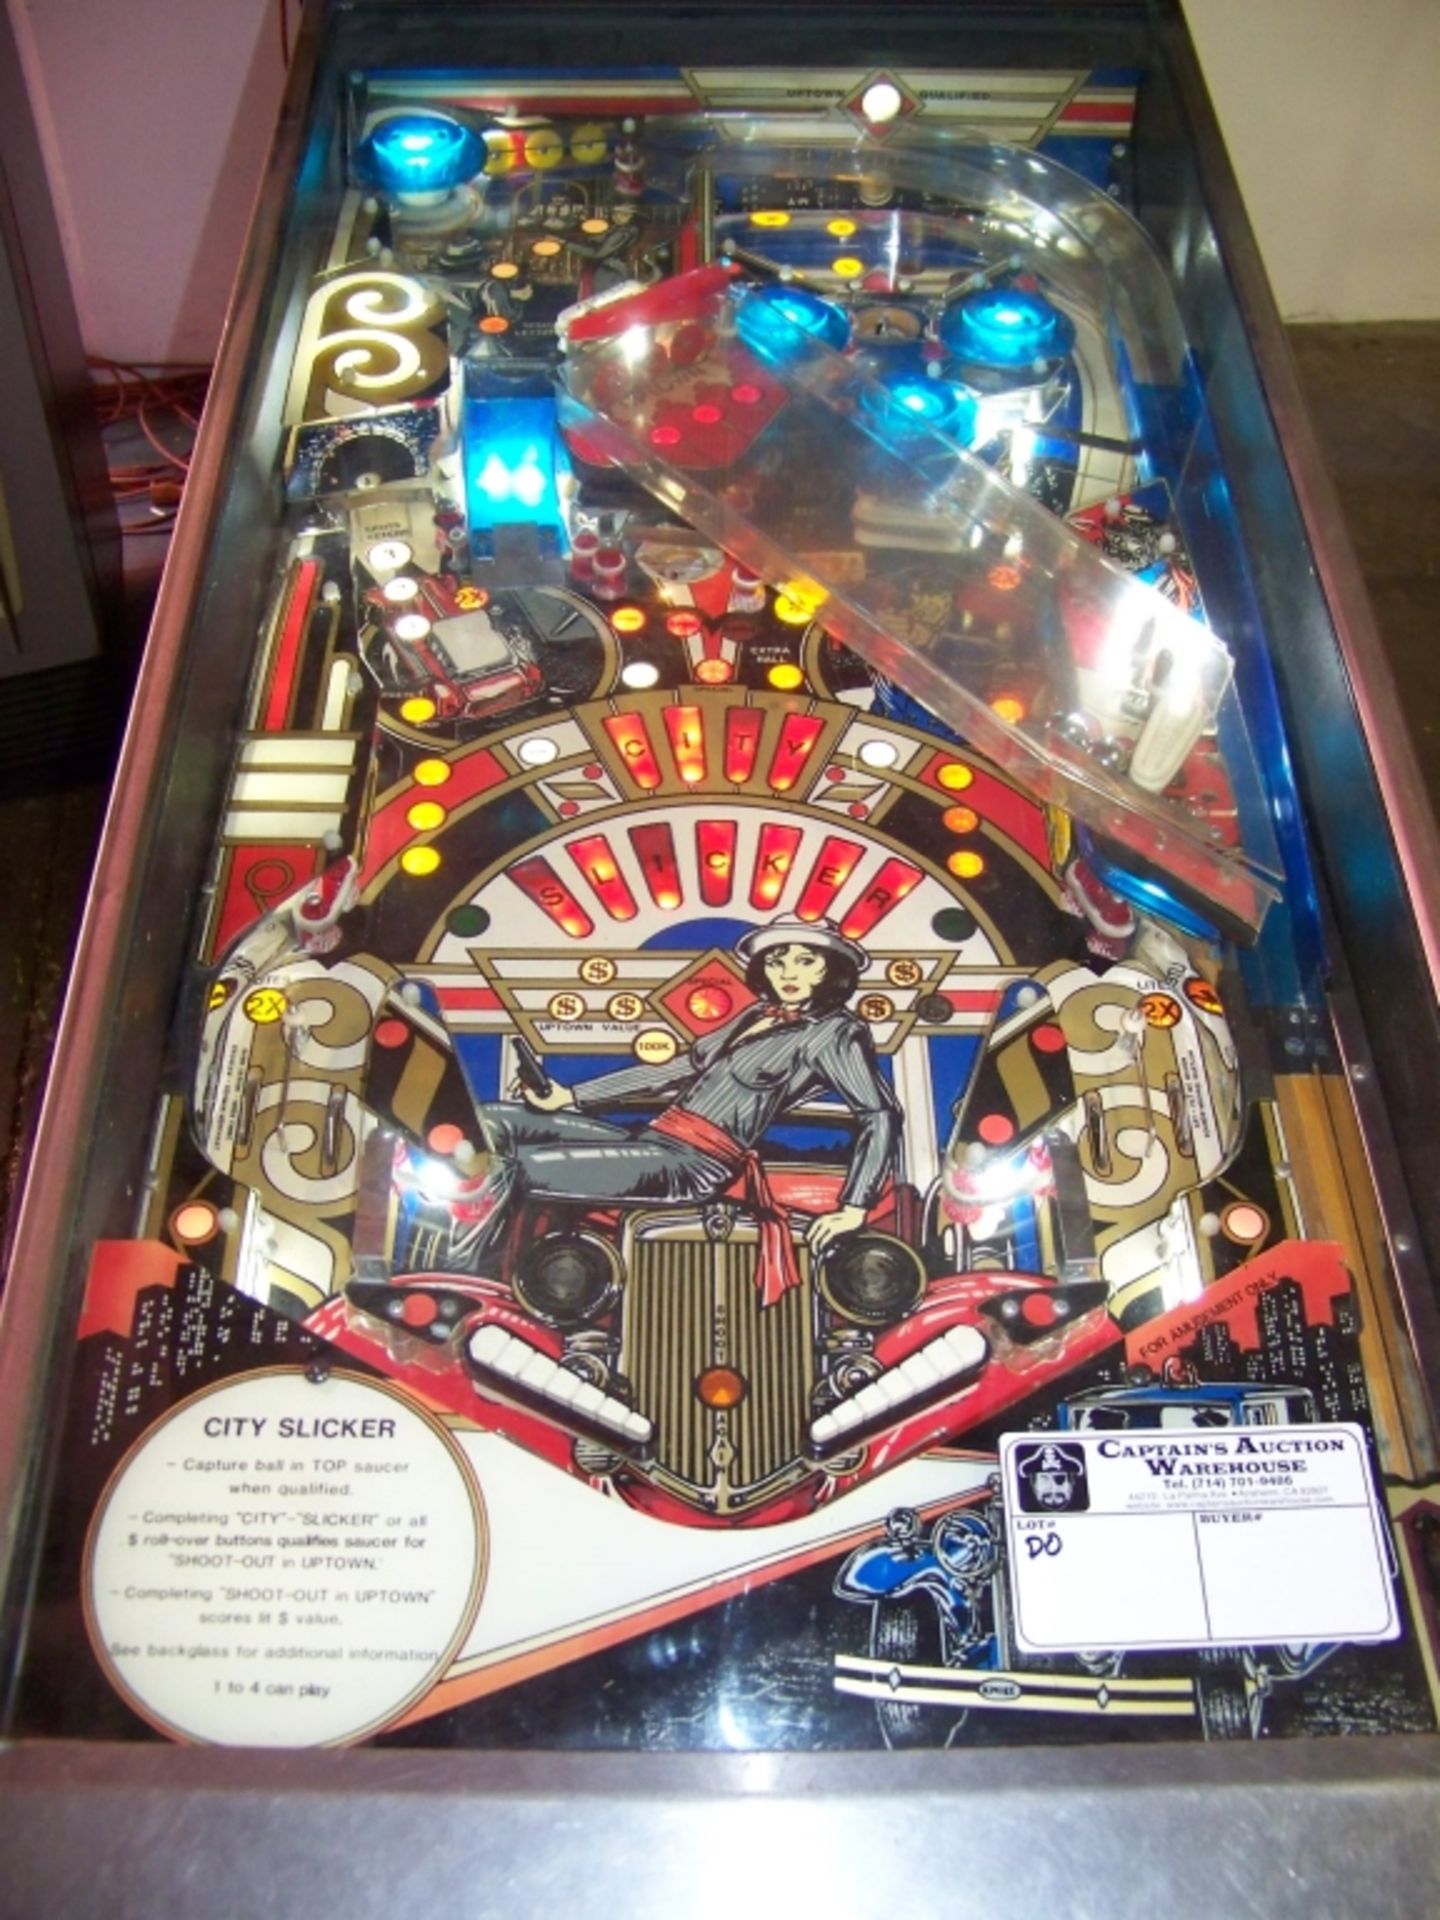 CITY SLICKER PINBALL MACHINE BALLY 1987 RARE! Item is in used condition. Evidence of wear and - Image 8 of 9